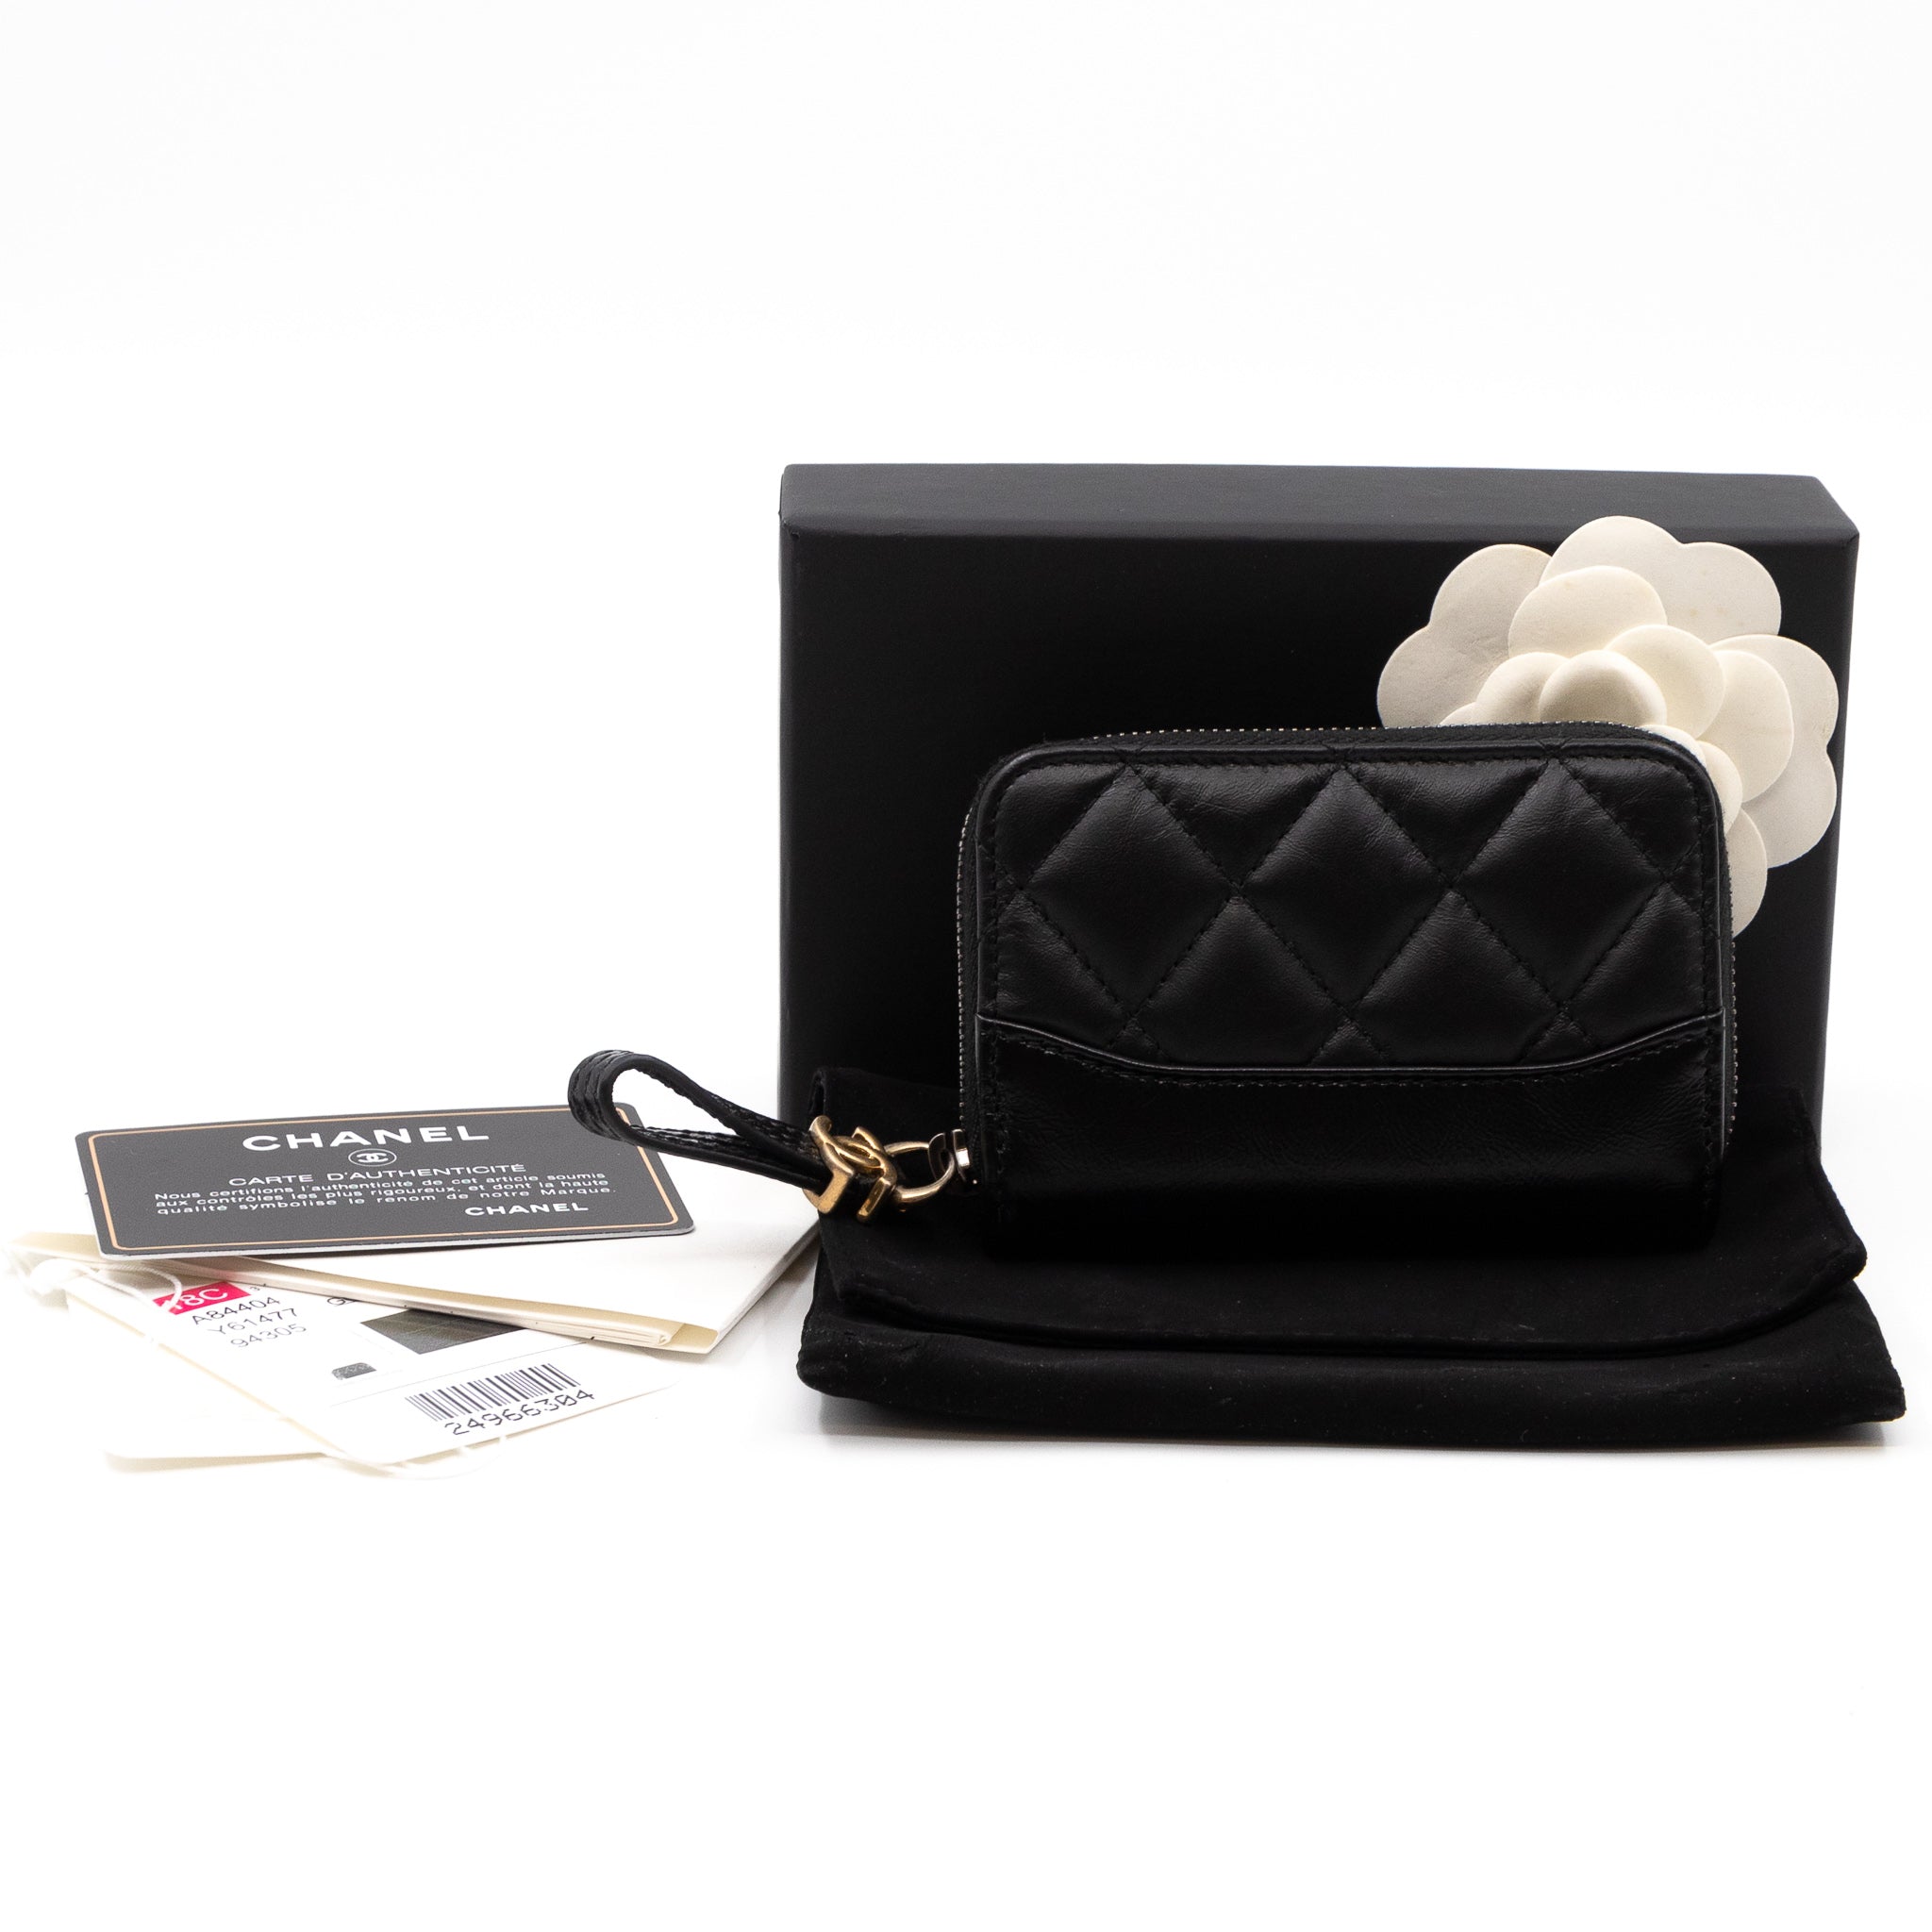 CHANEL 2017 GABRIELLE CLUTCH WITH CHAIN QUILTED LEATHER SHOULDER BAG |  nikkibradford